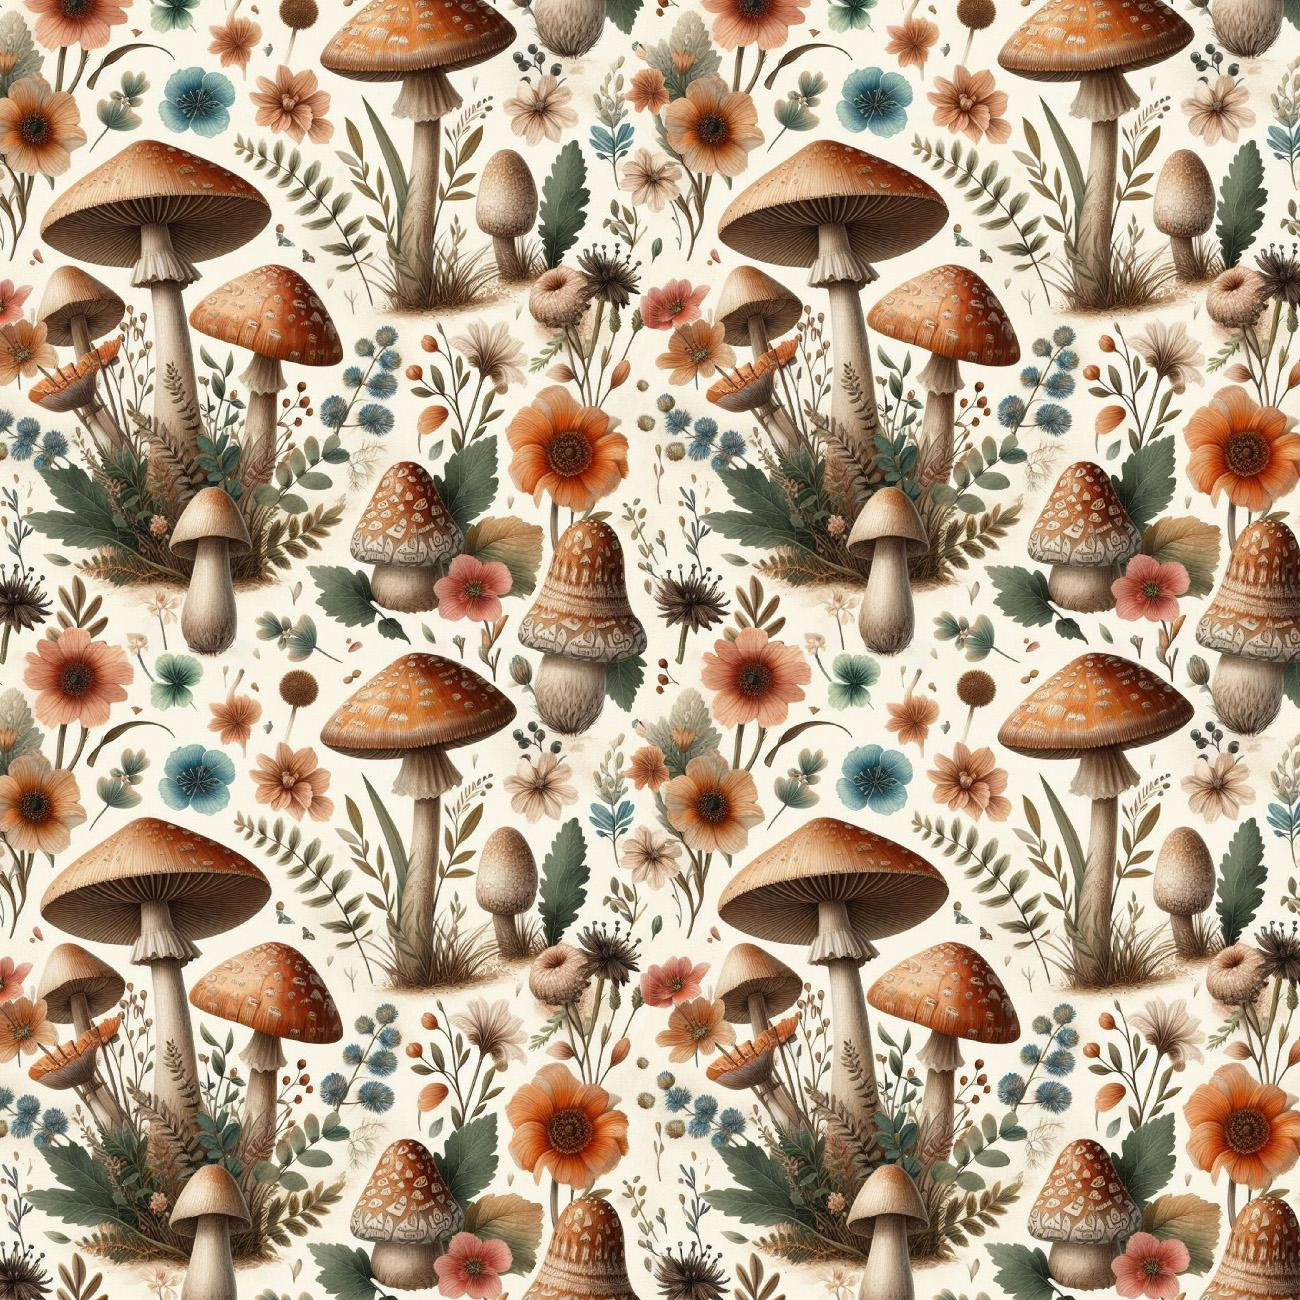 BOTANICAL FOREST wz.1 - Cotton woven fabric